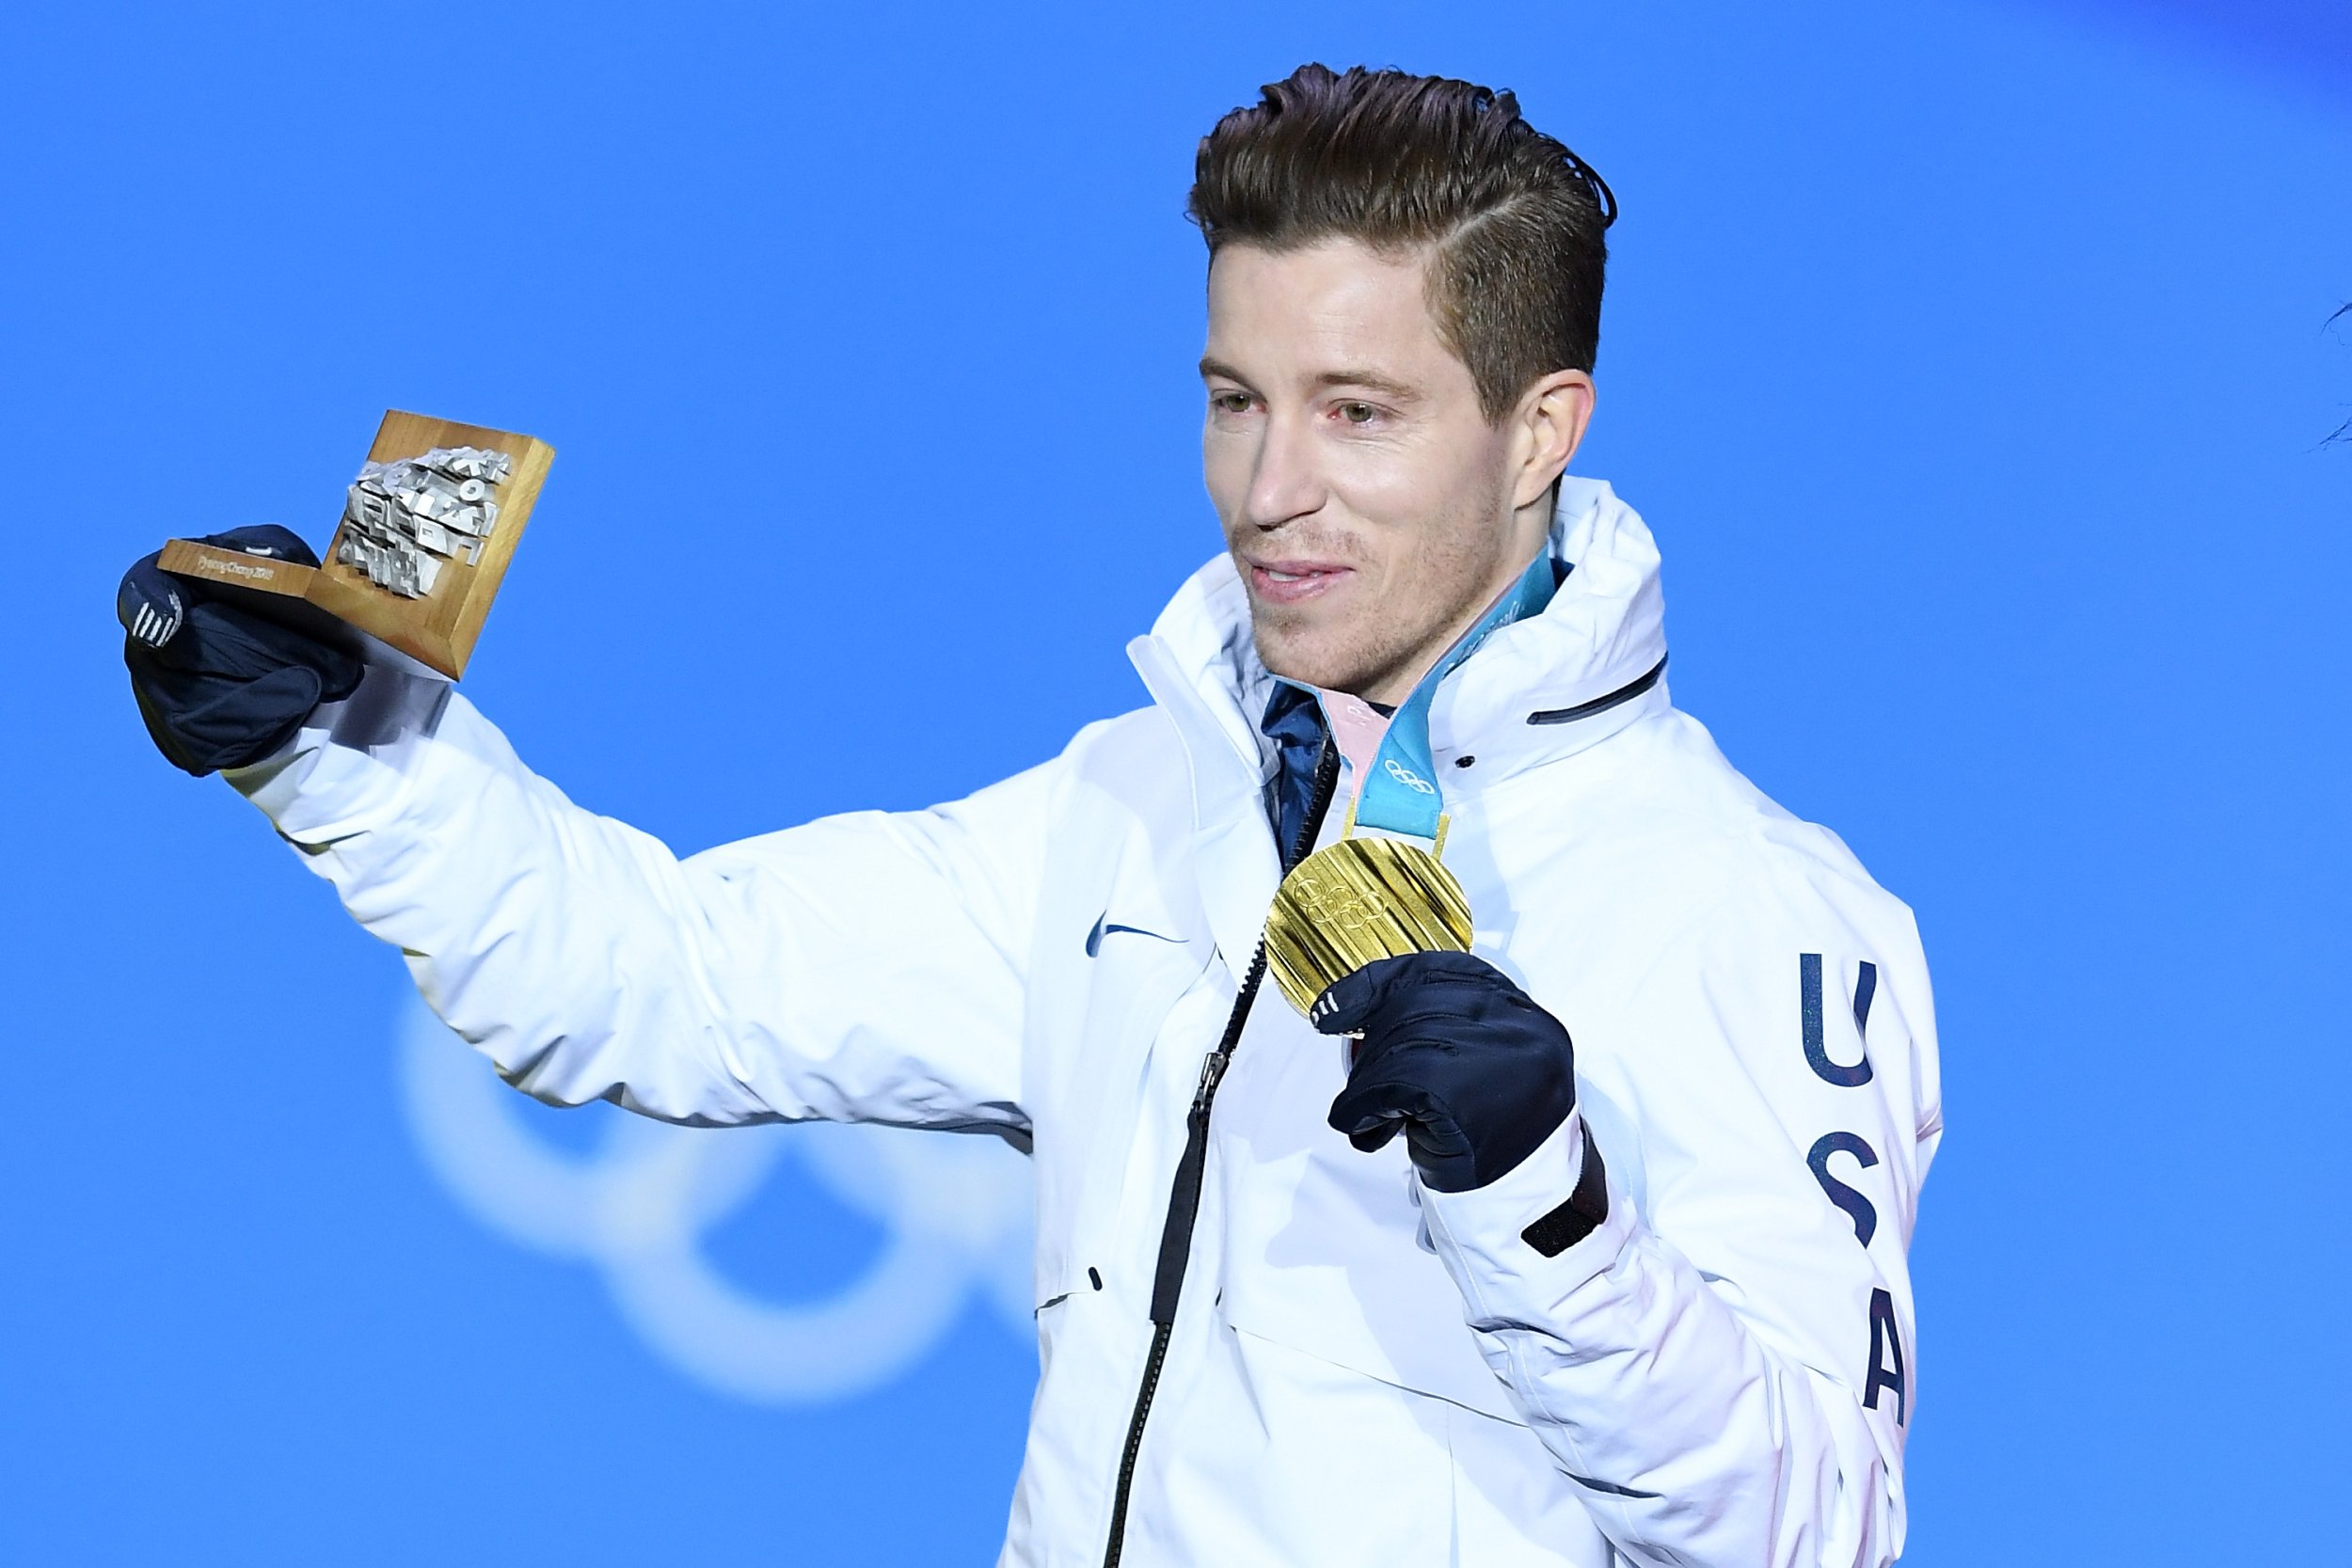 Shaun White announces retirement from competition after Winter